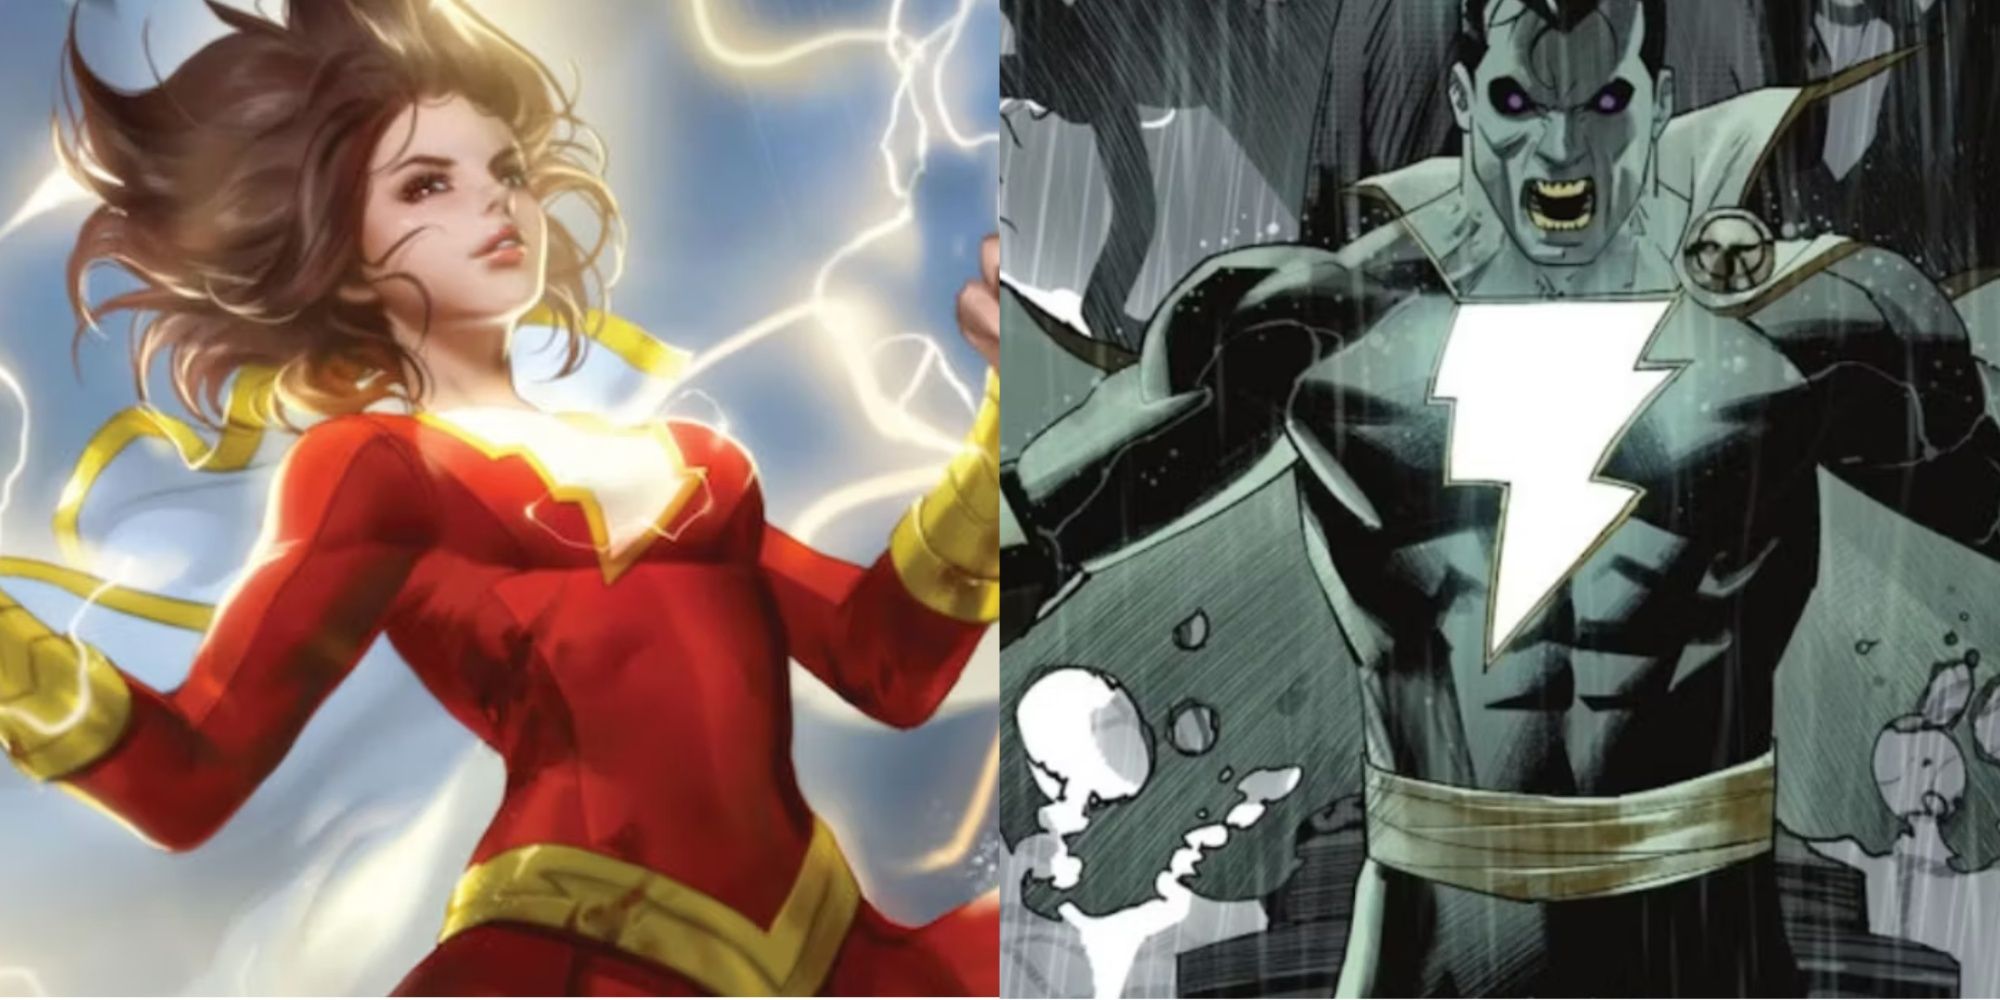 A split image of Mary Marvel and a corrupted Shazam in DC Comics